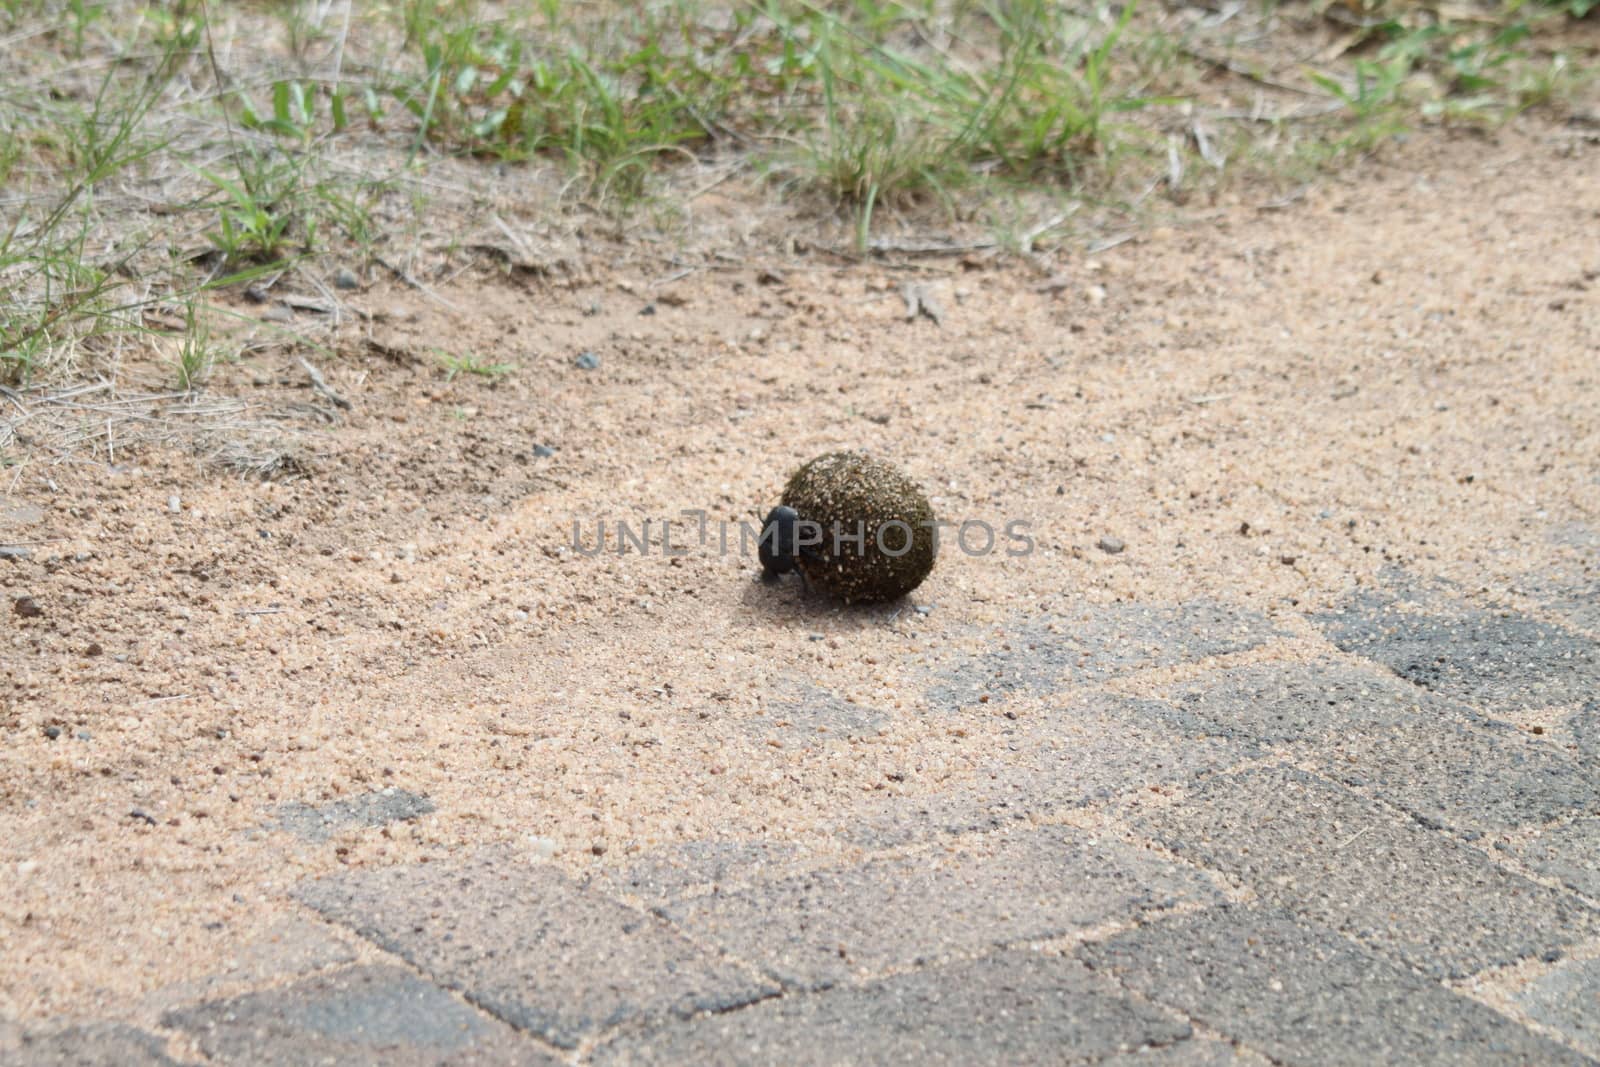 One dung beetle rolls a dung ball on the road